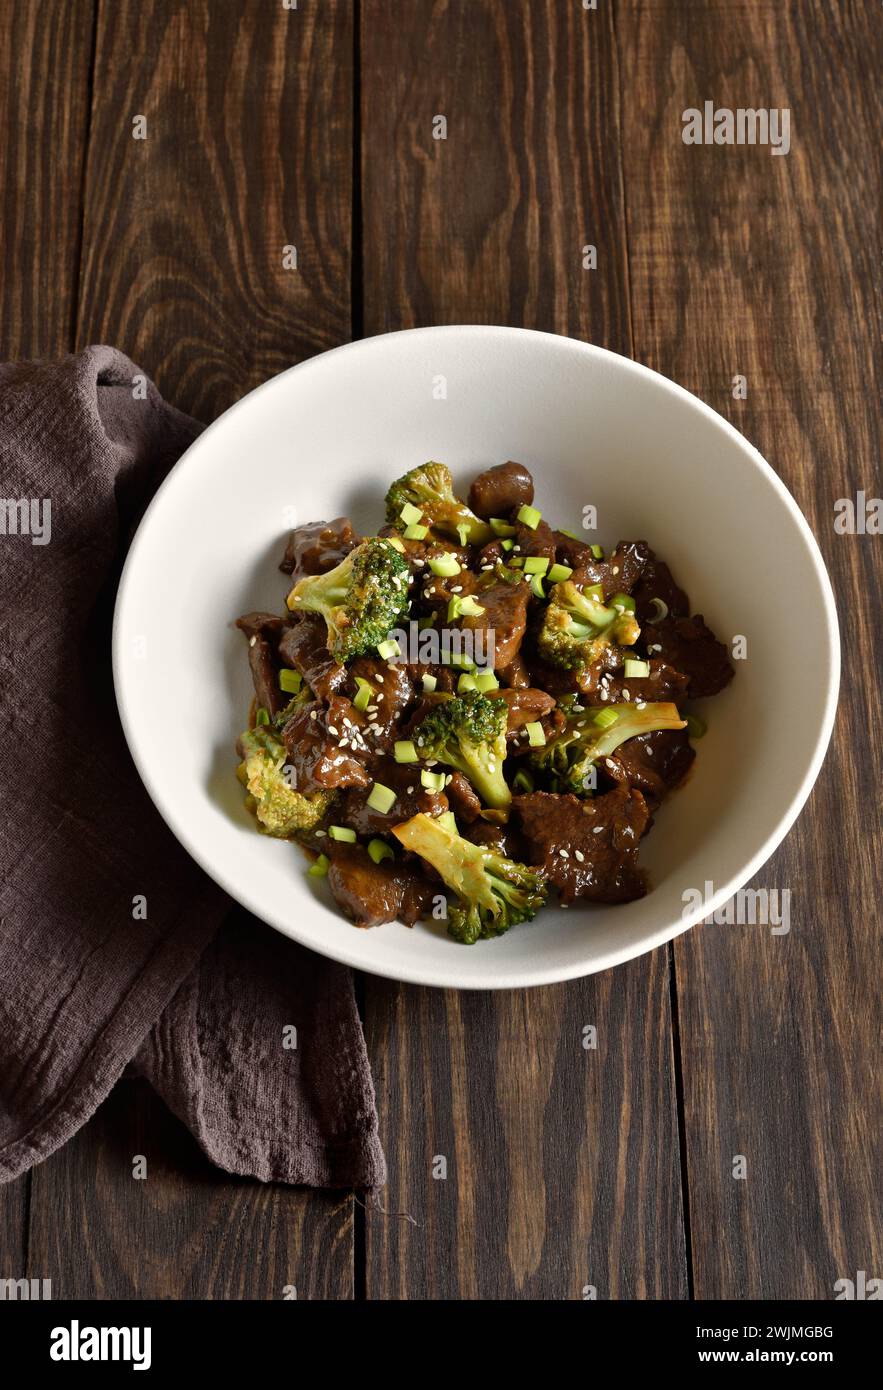 Beef with broccoli in bowl on wooden background. Thinly sliced beef meat with roasted broccoli. Close up view Stock Photo